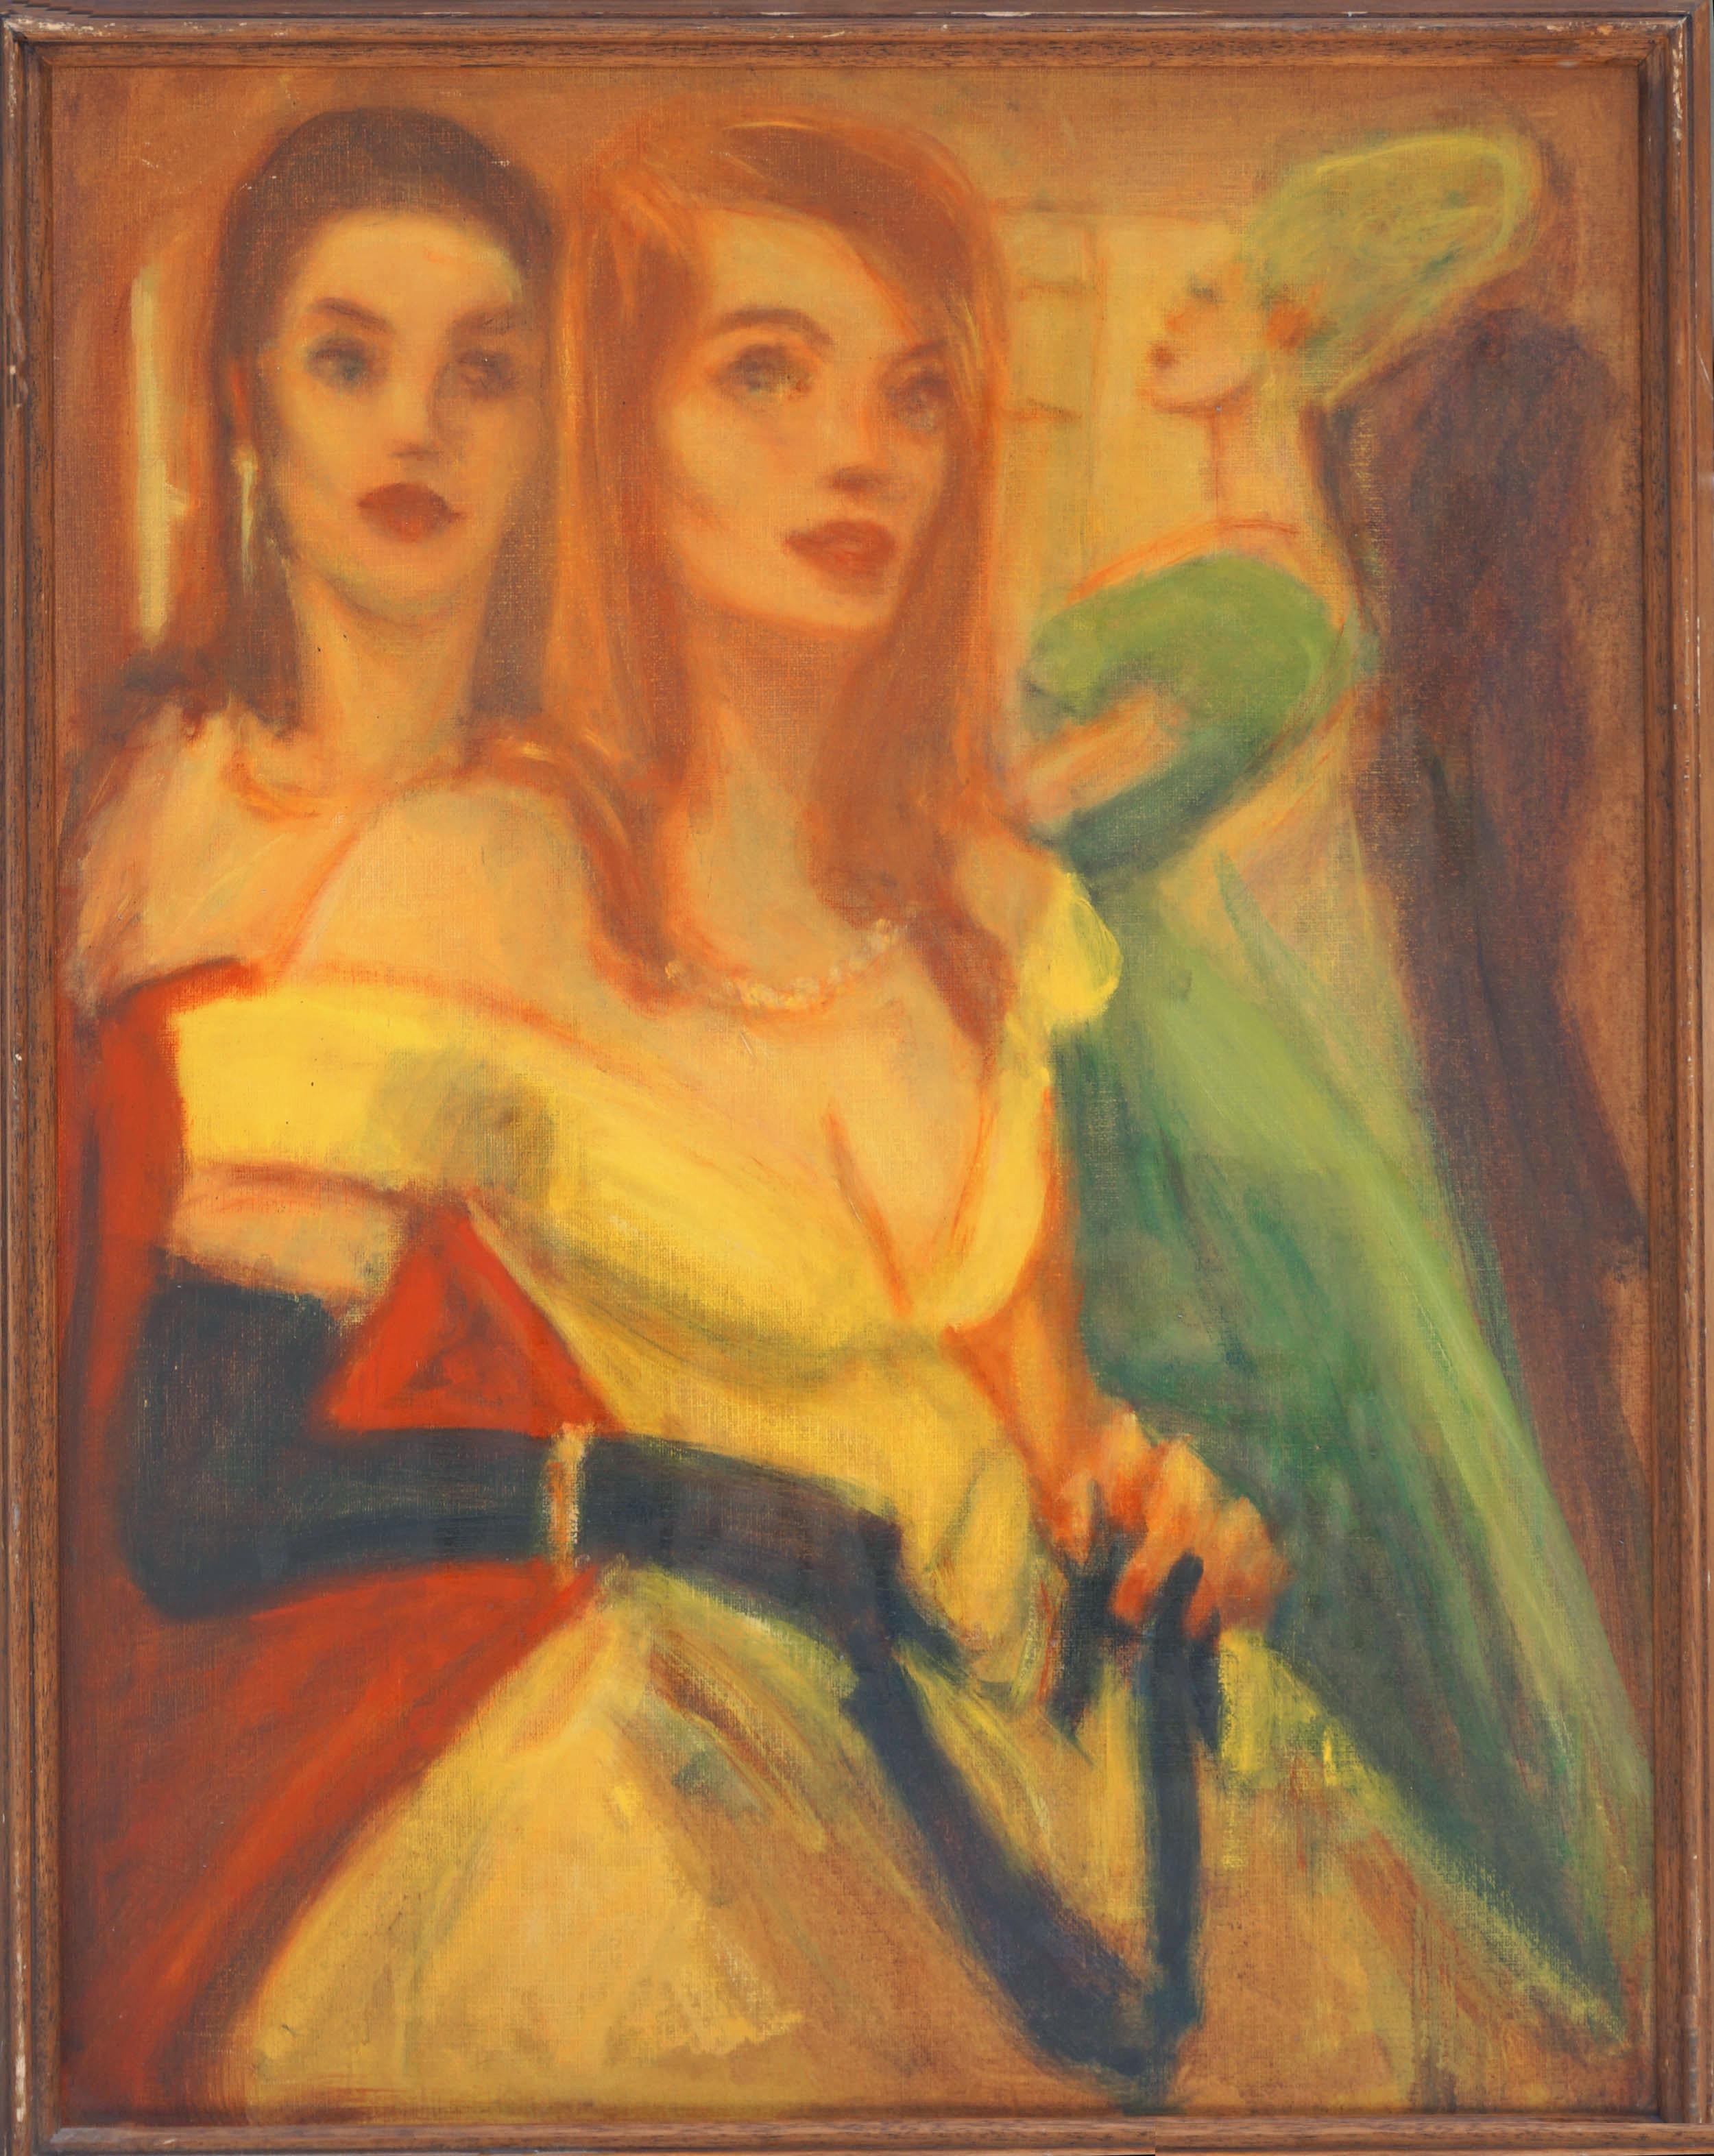 Unknown Figurative Painting - Pulp Art Figurative, Women at Party in Evening Dresses with Black Gloves 2 sided